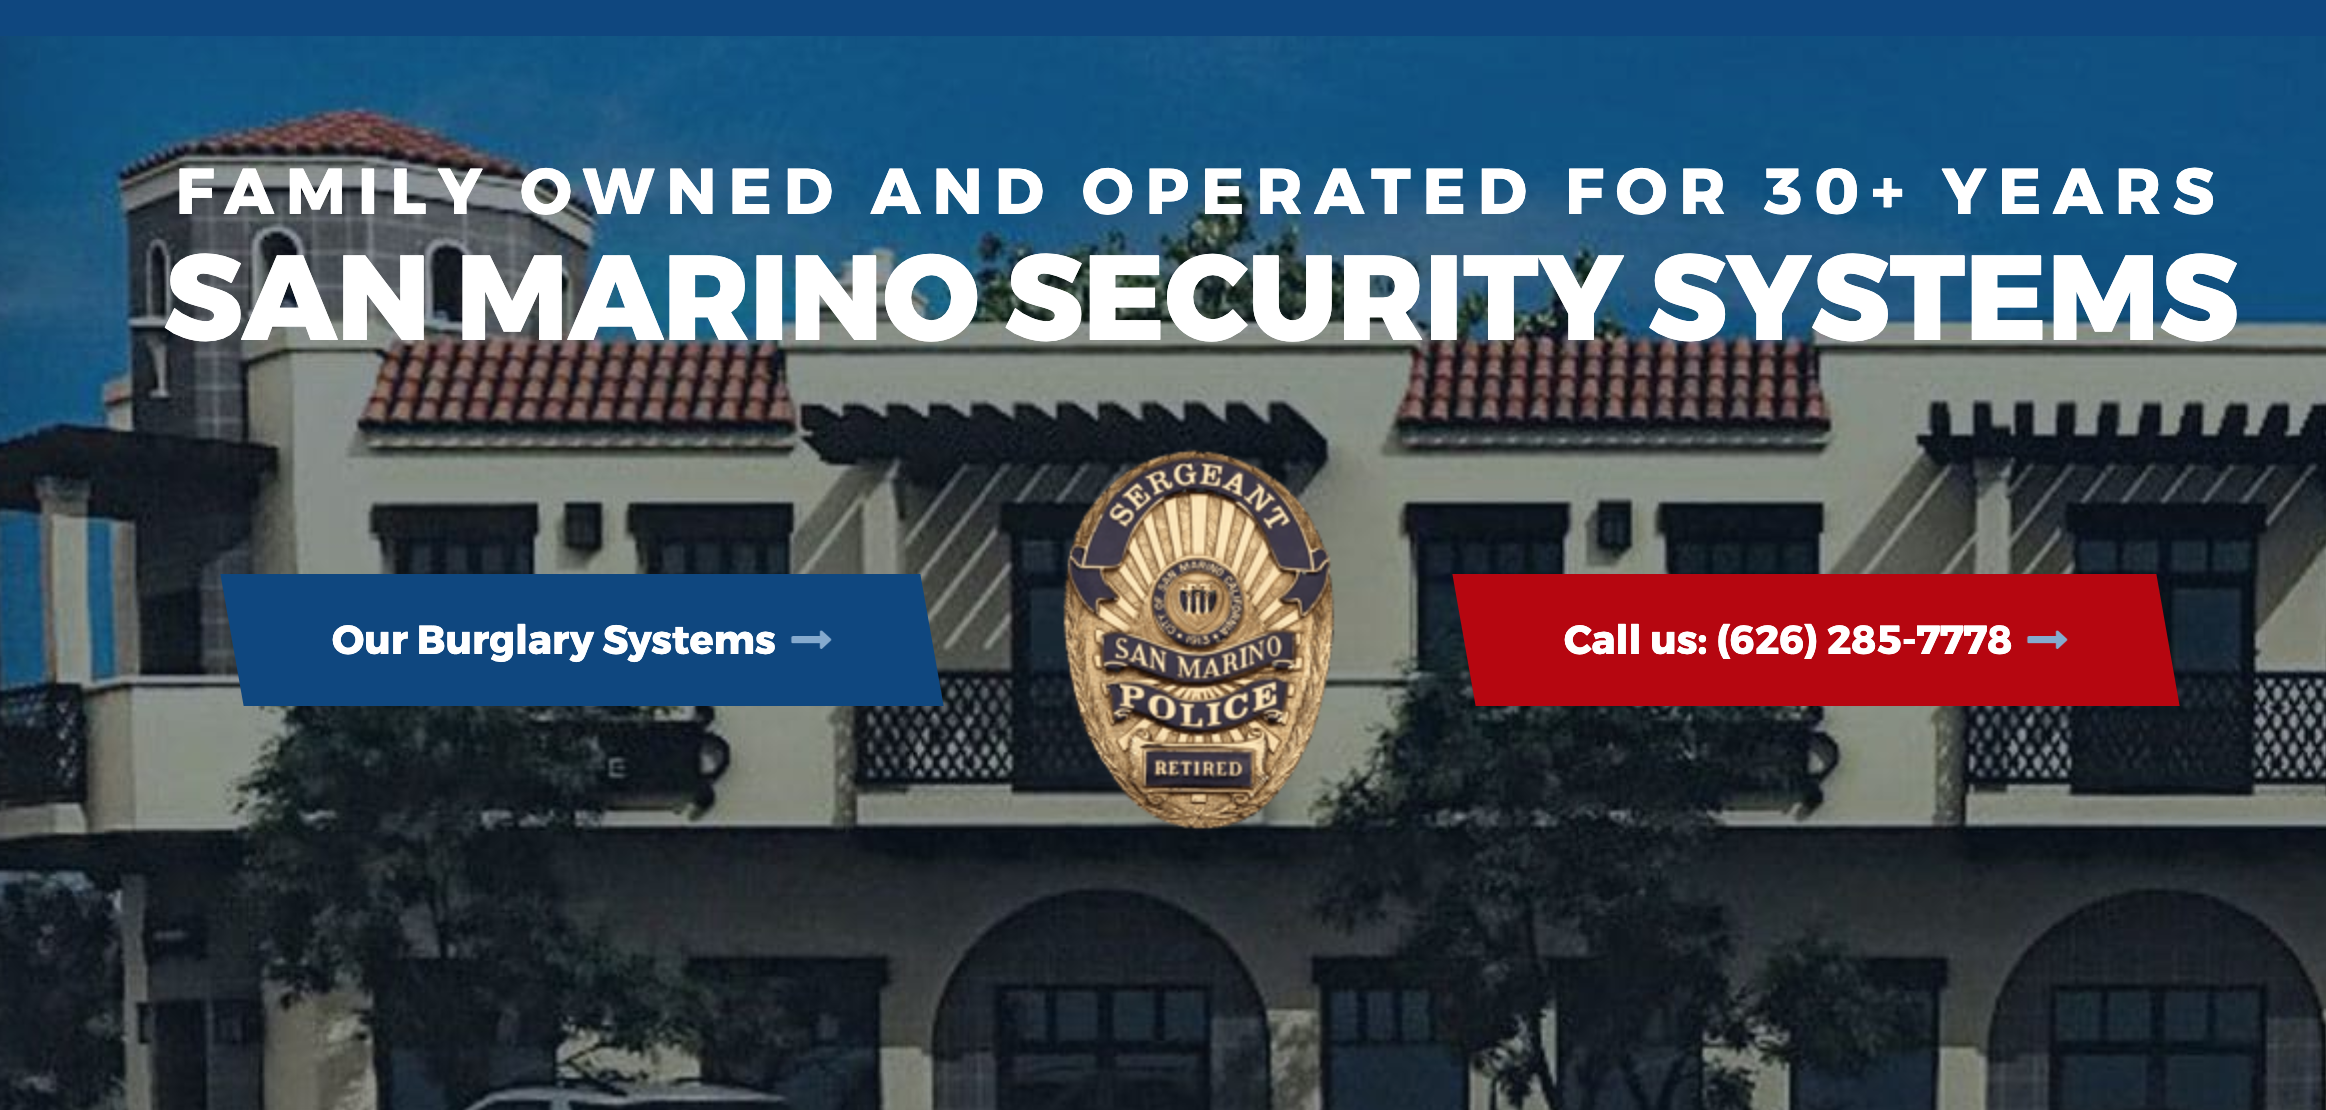 Featuring San Marino Security Systems